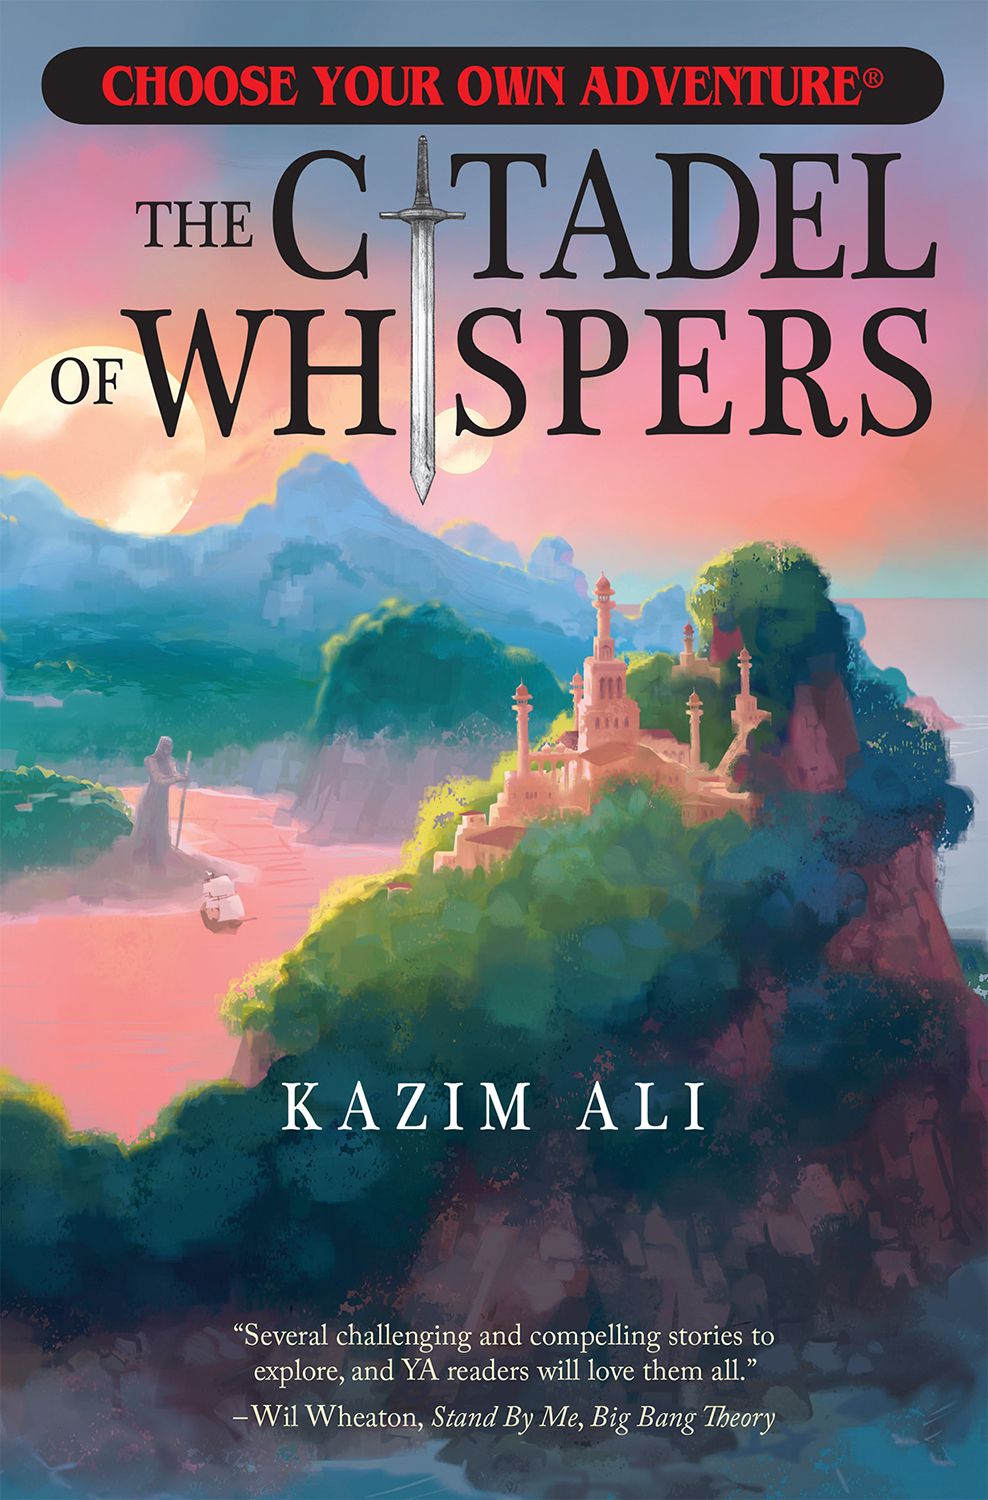 Book cover of The Citadel of Whispers by Kazim Ali